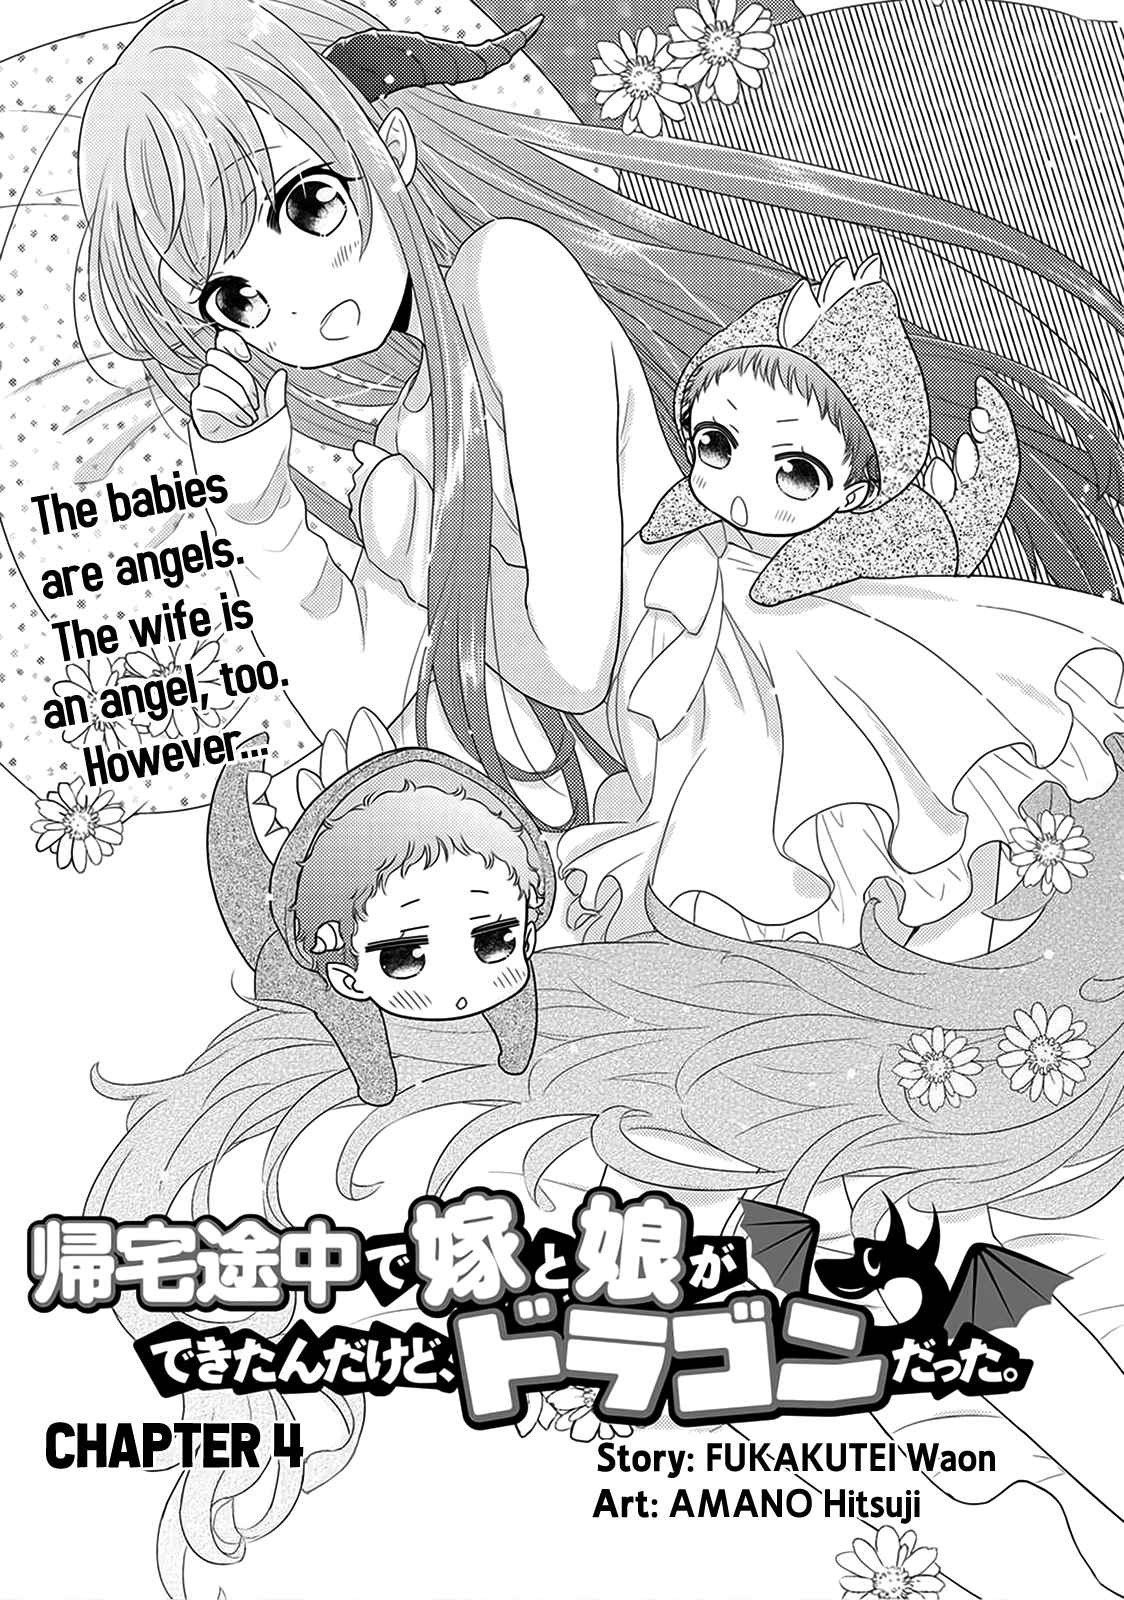 On The Way Home, I Got A Bride And Twin Daughters, But They Were Dragons Ch.4